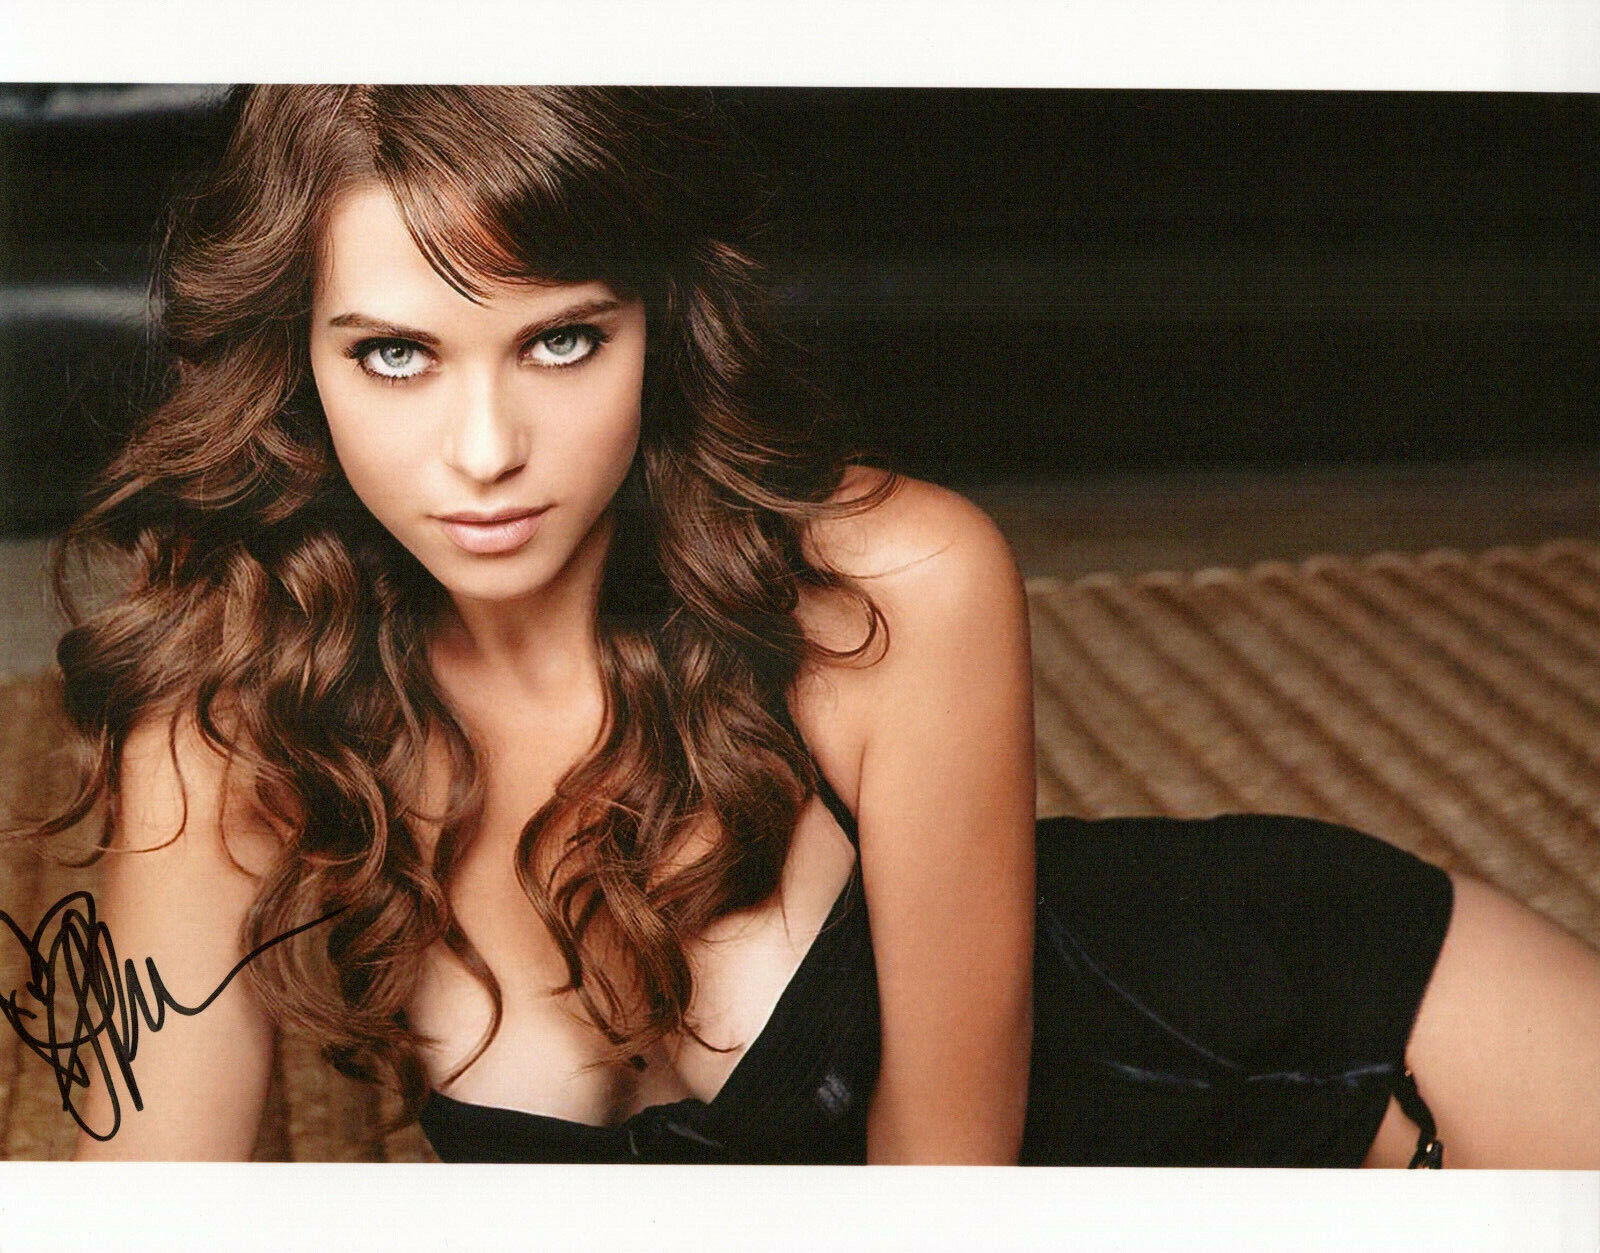 Lyndsy Fonseca glamour shot autographed Photo Poster painting signed 8x10 #1